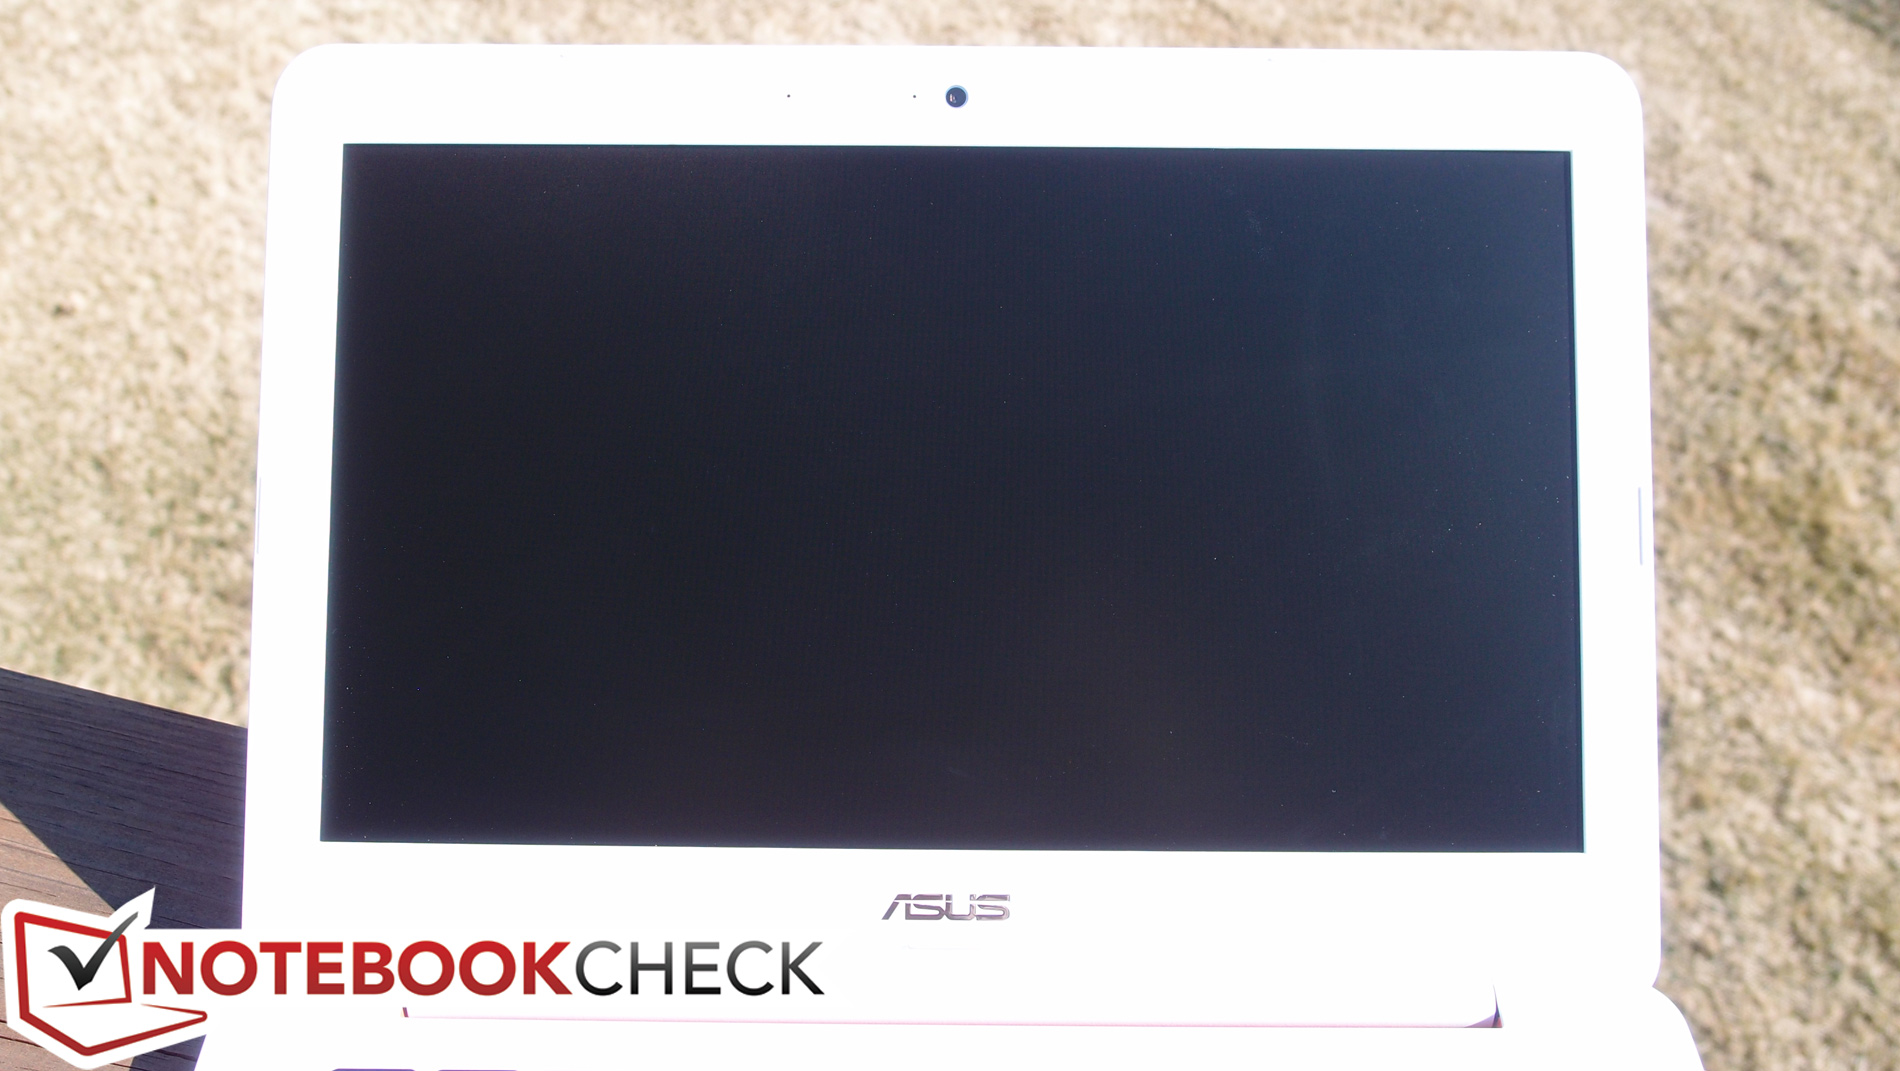 Asus C300MA Chromebook Review - NotebookCheck.net Reviews